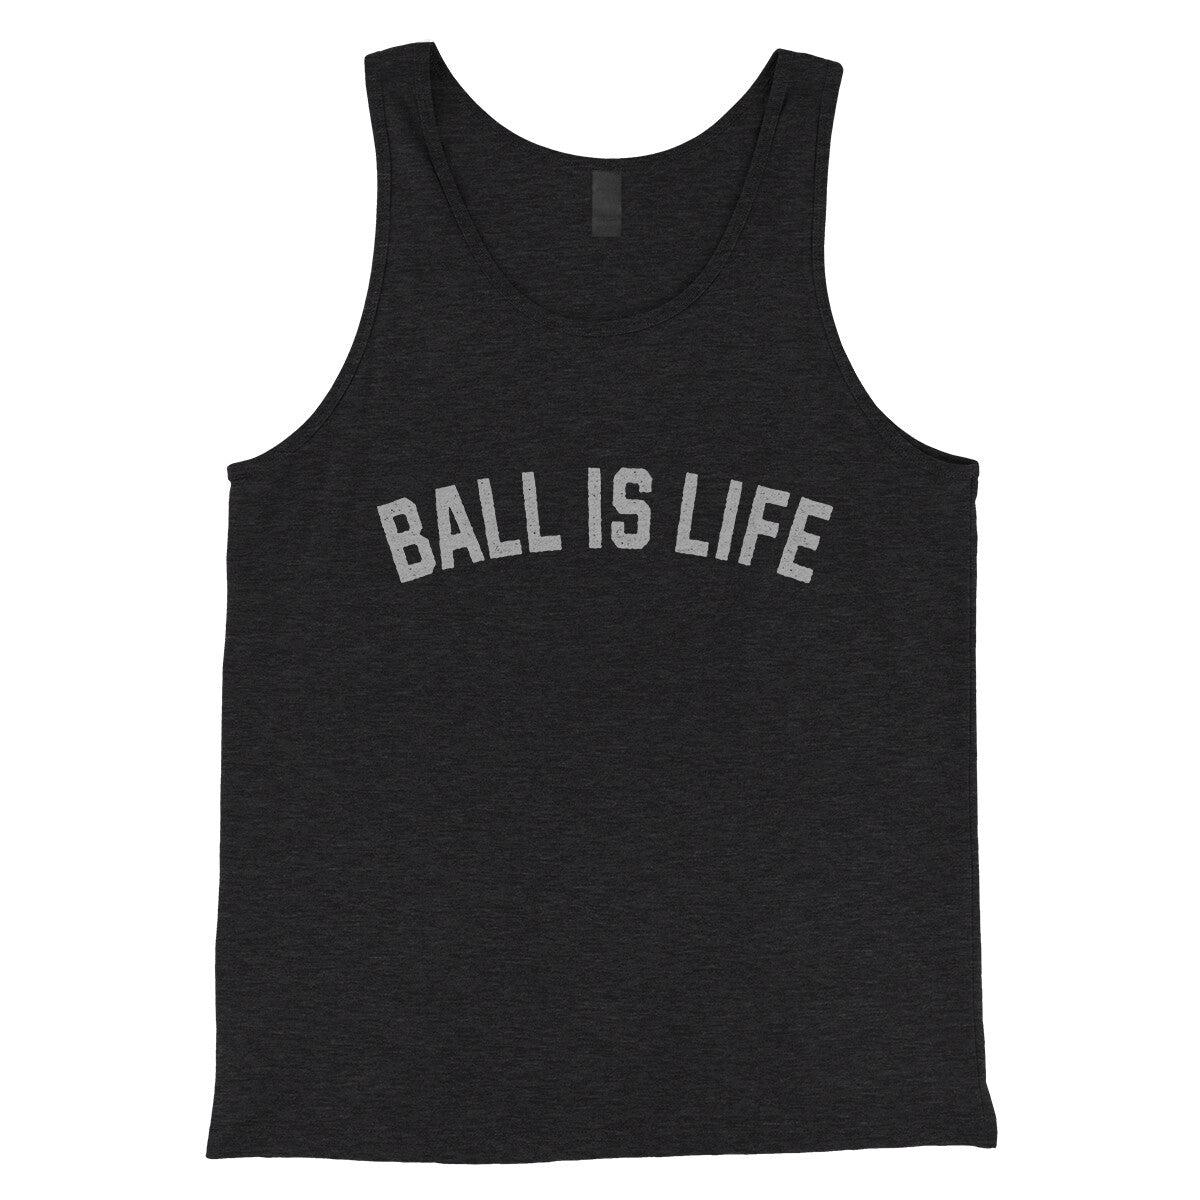 Ball is Life in Charcoal Black TriBlend Color